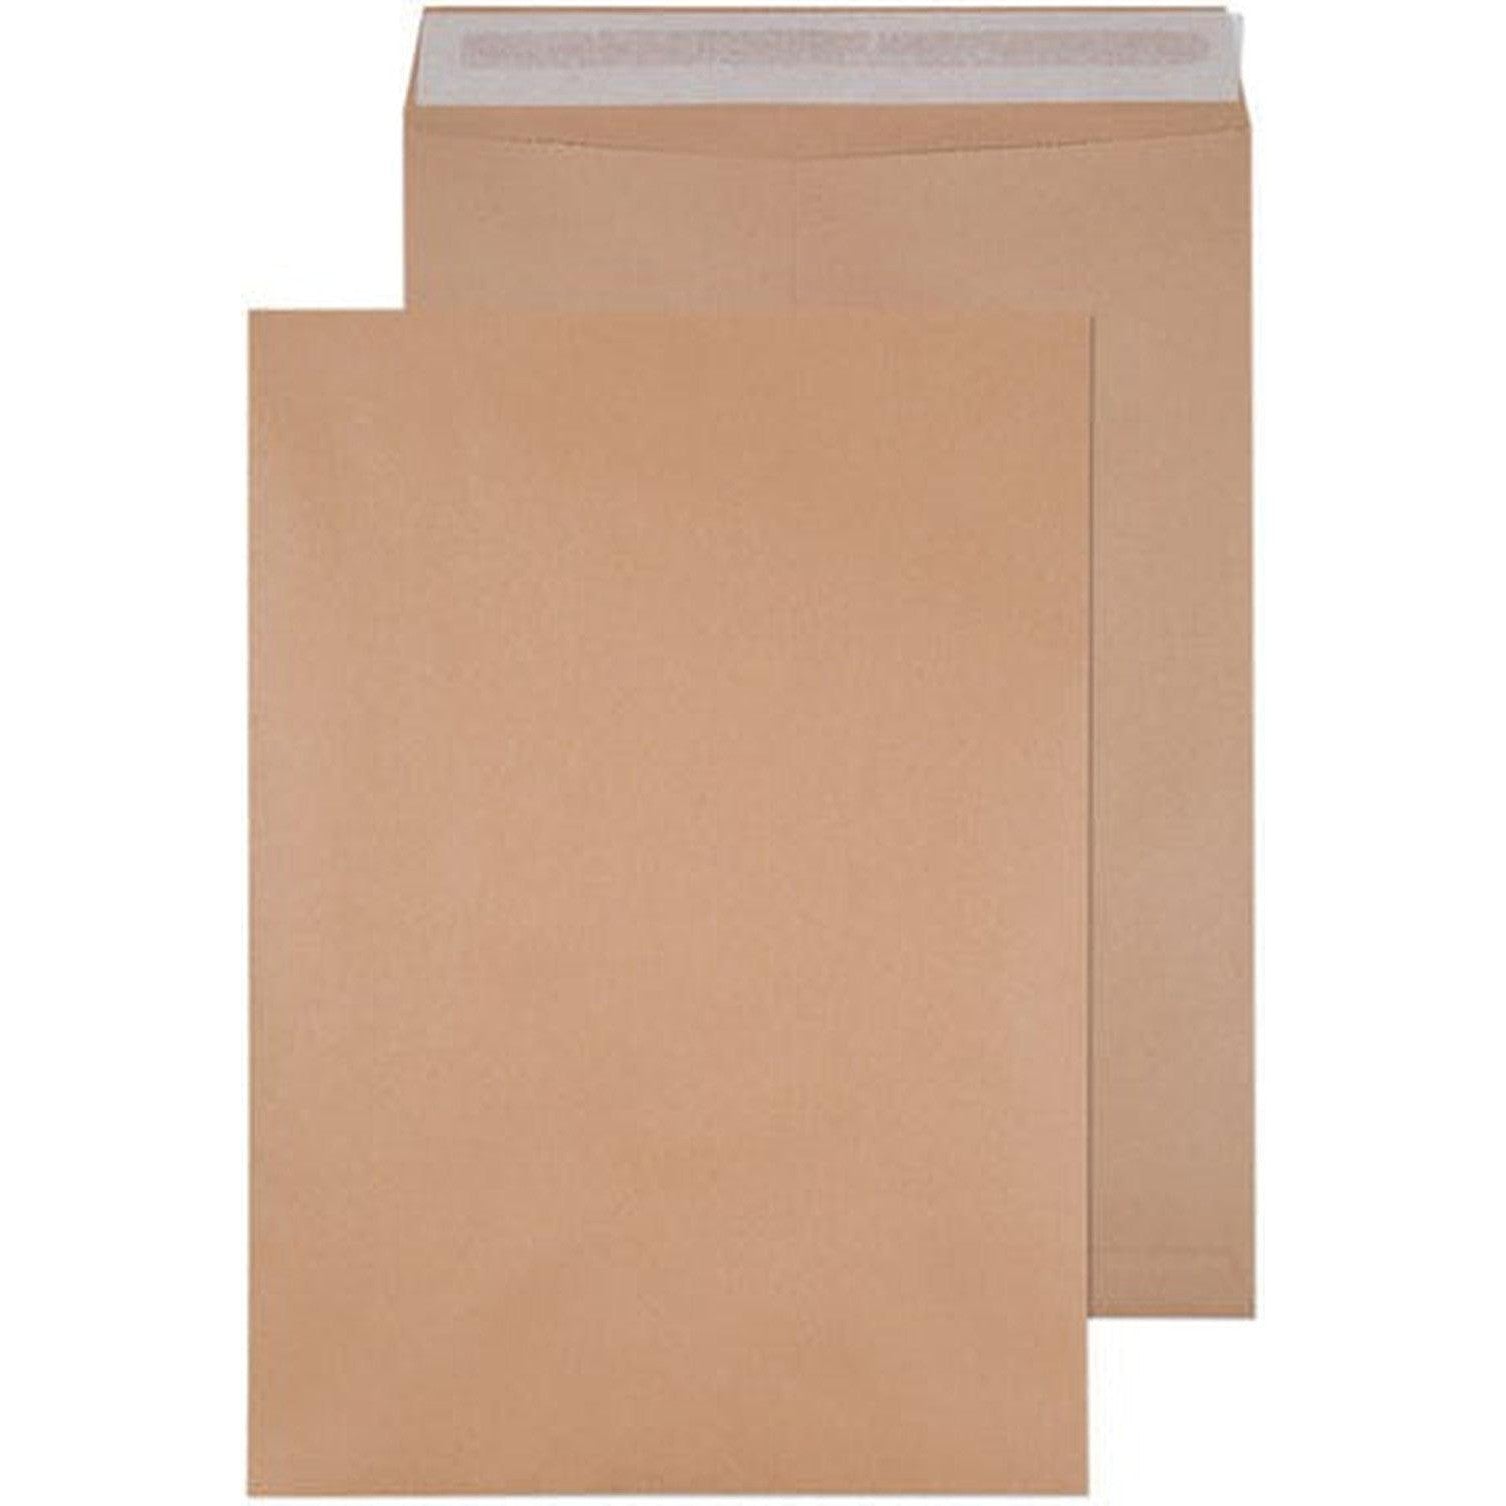 Envelope A3 Brown Or White Pack Of 50-Envelopes-Other-Brown-Star Light Kuwait